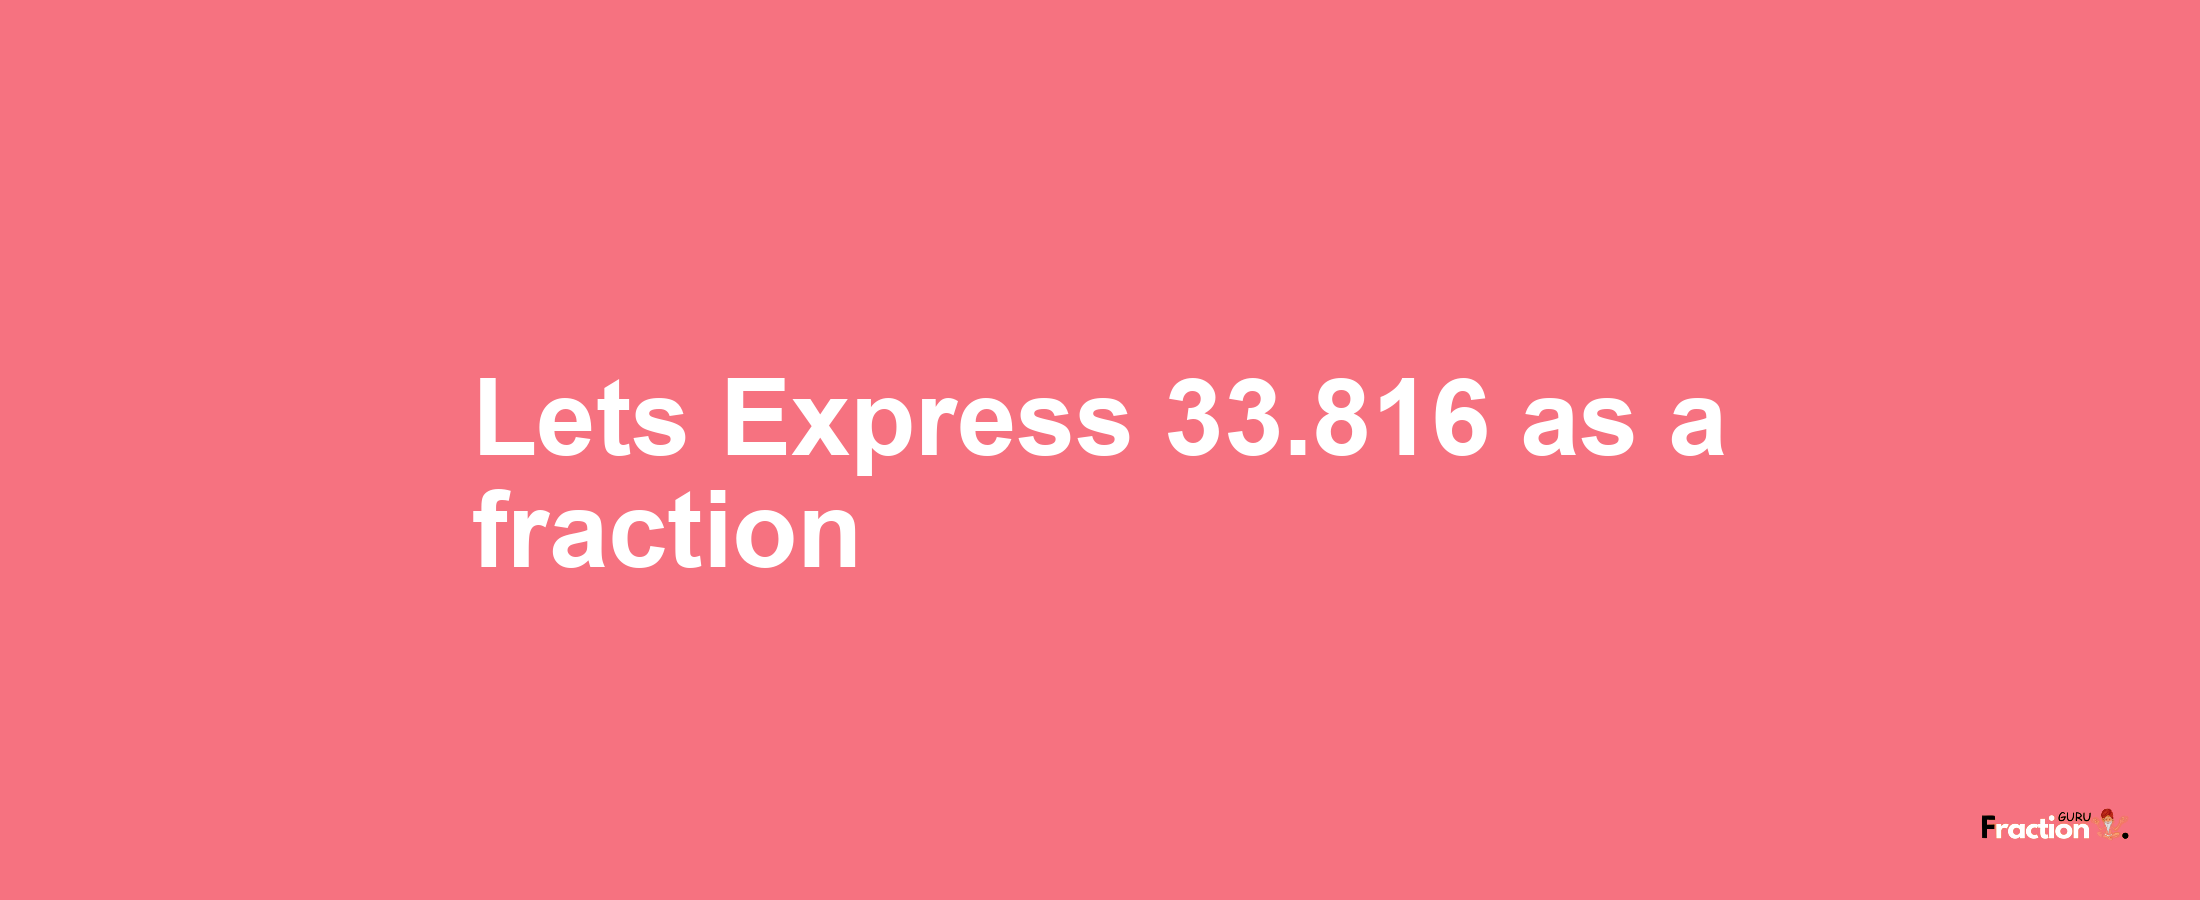 Lets Express 33.816 as afraction